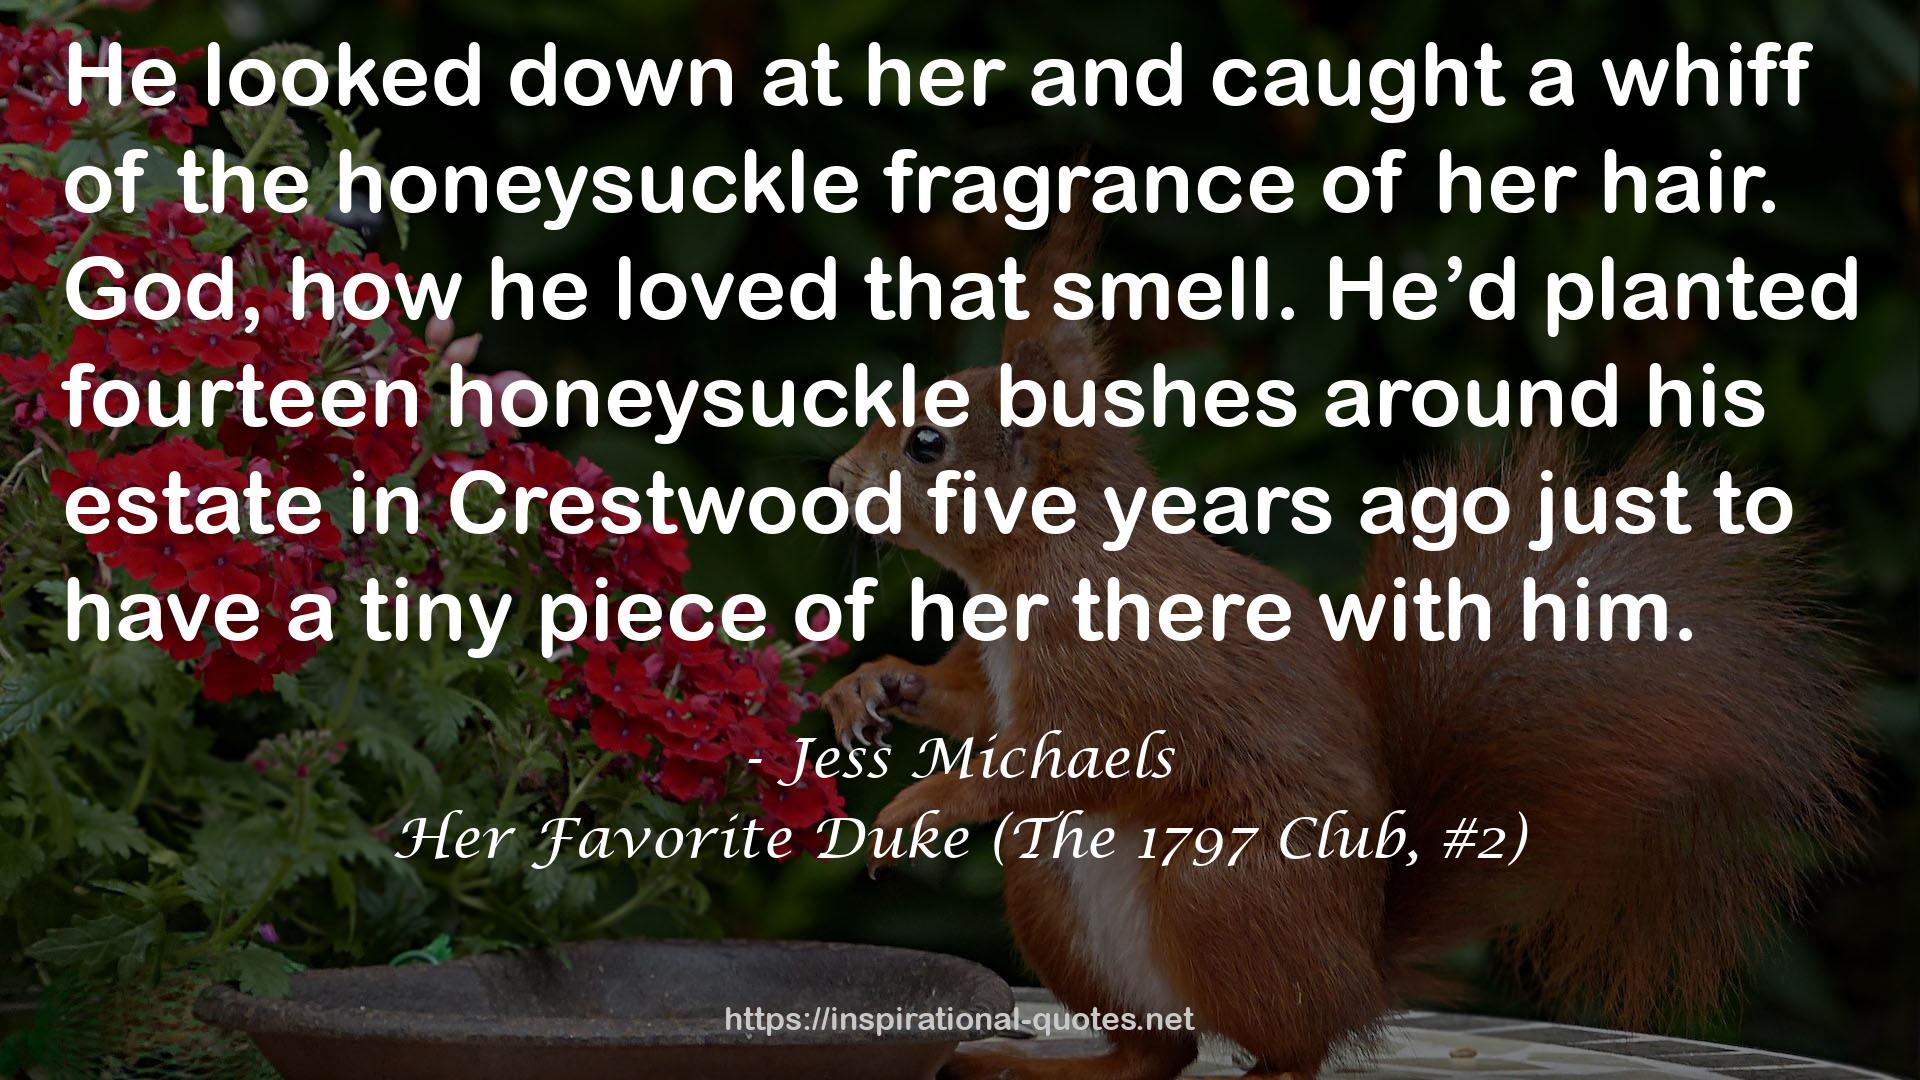 Her Favorite Duke (The 1797 Club, #2) QUOTES